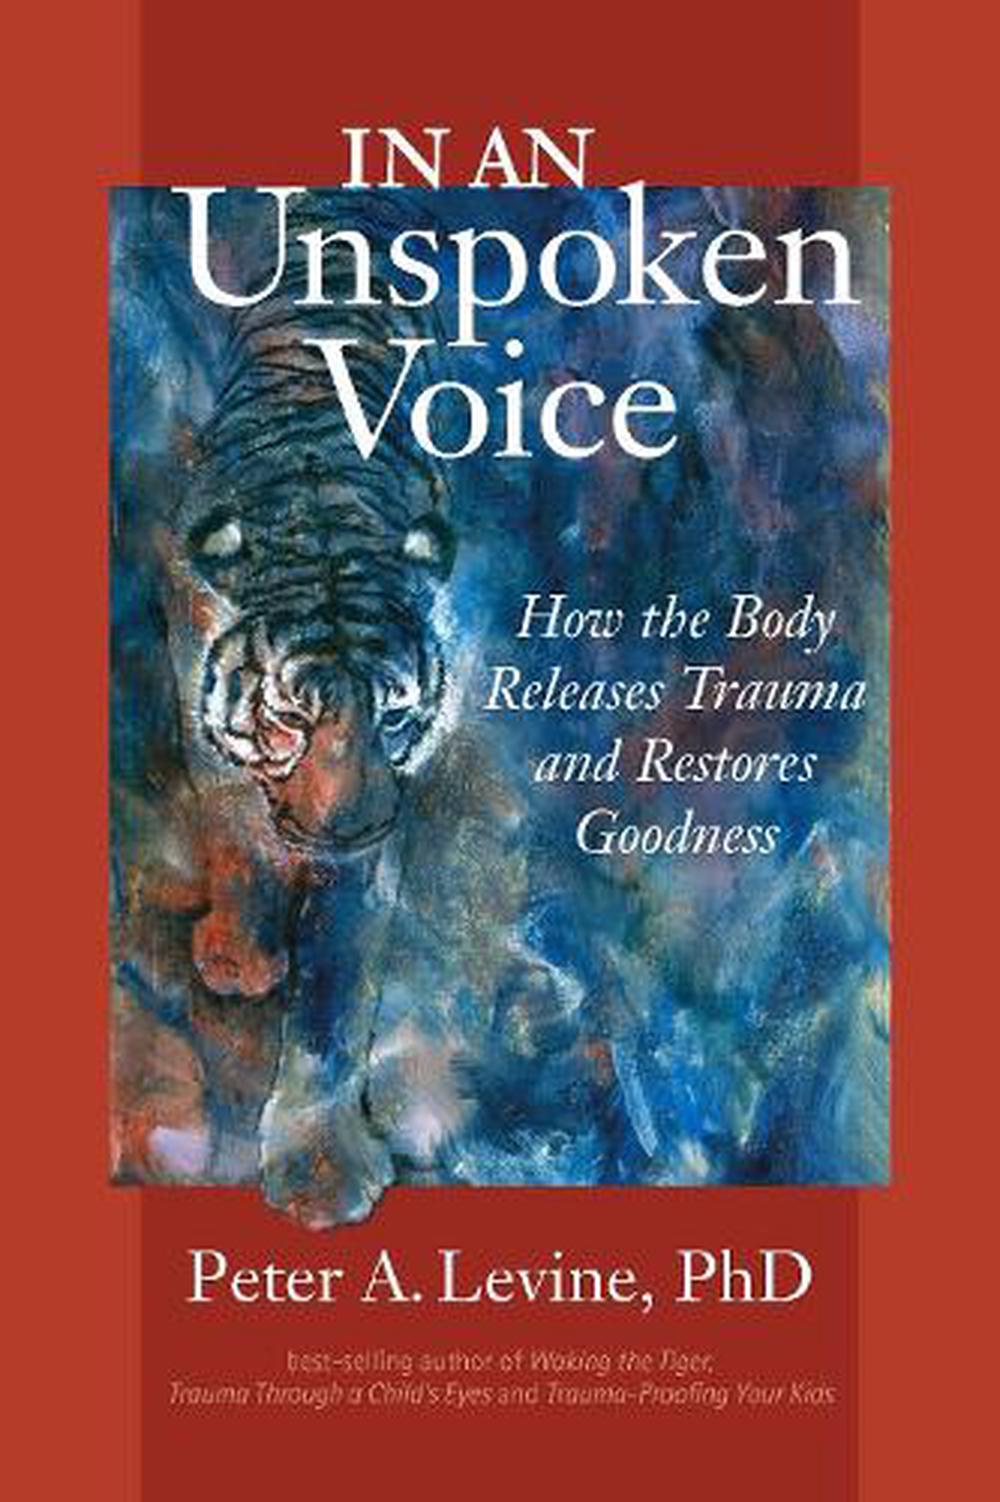 In an Unspoken Voice How the Body Releases Trauma and Restores